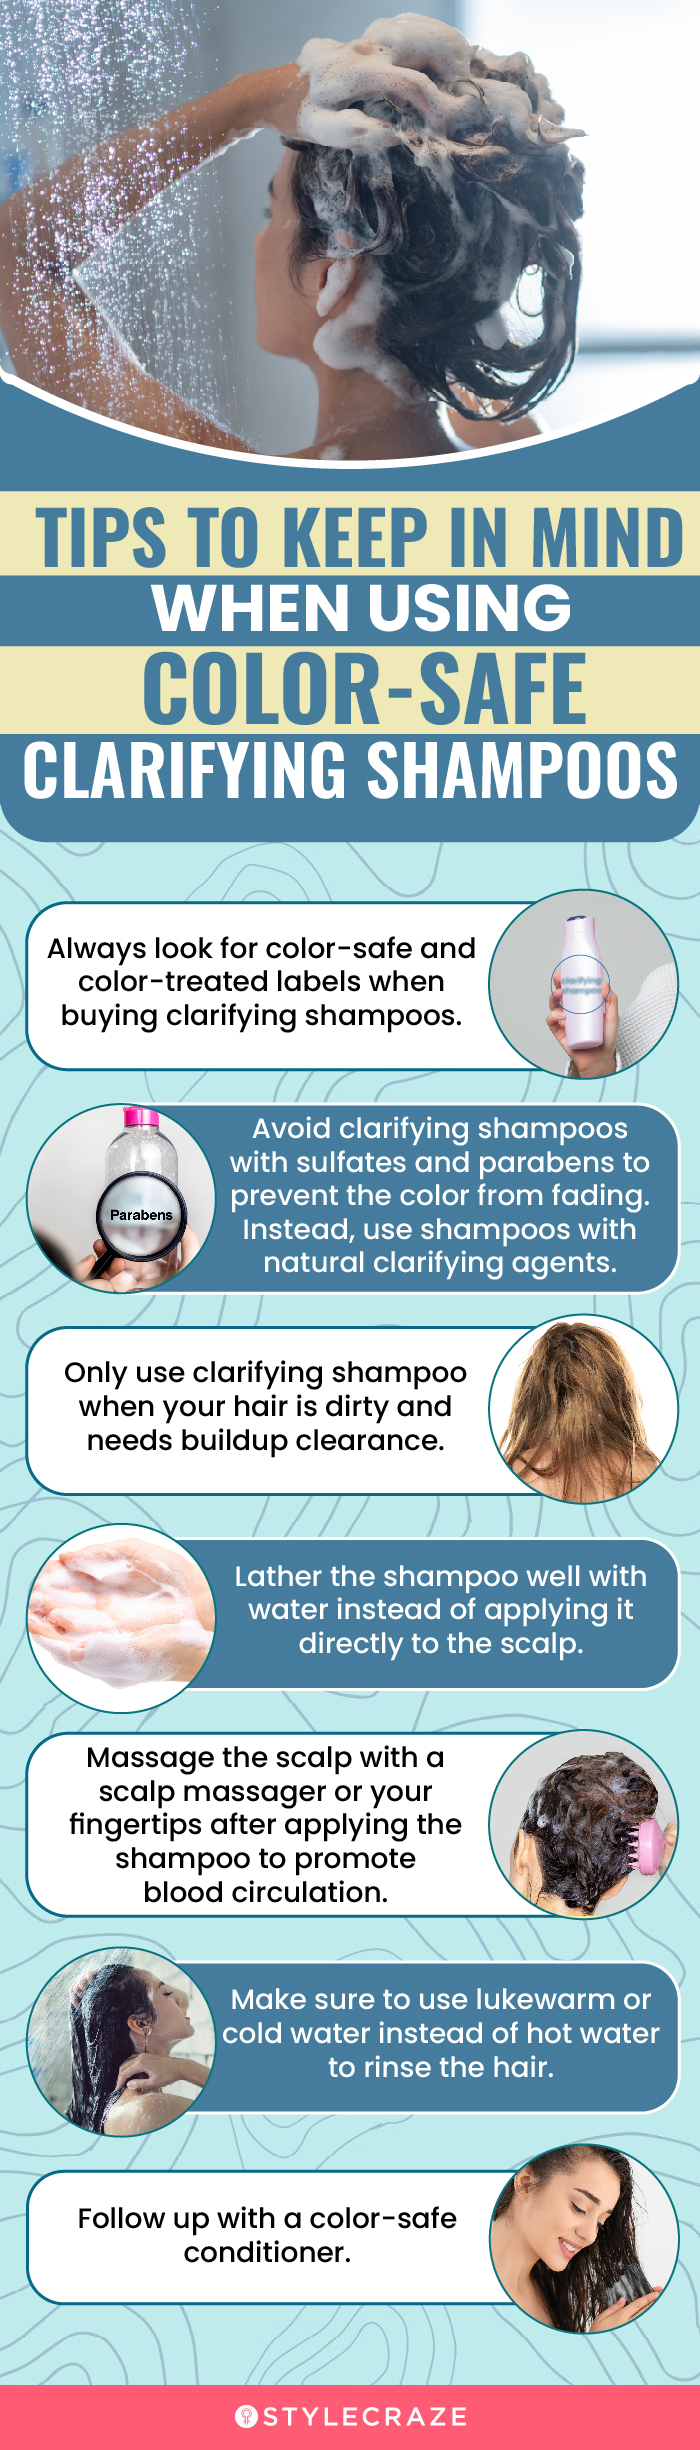 Tips To Keep In Mind When Using Color-Safe Clarifying Shampoo (infographic)